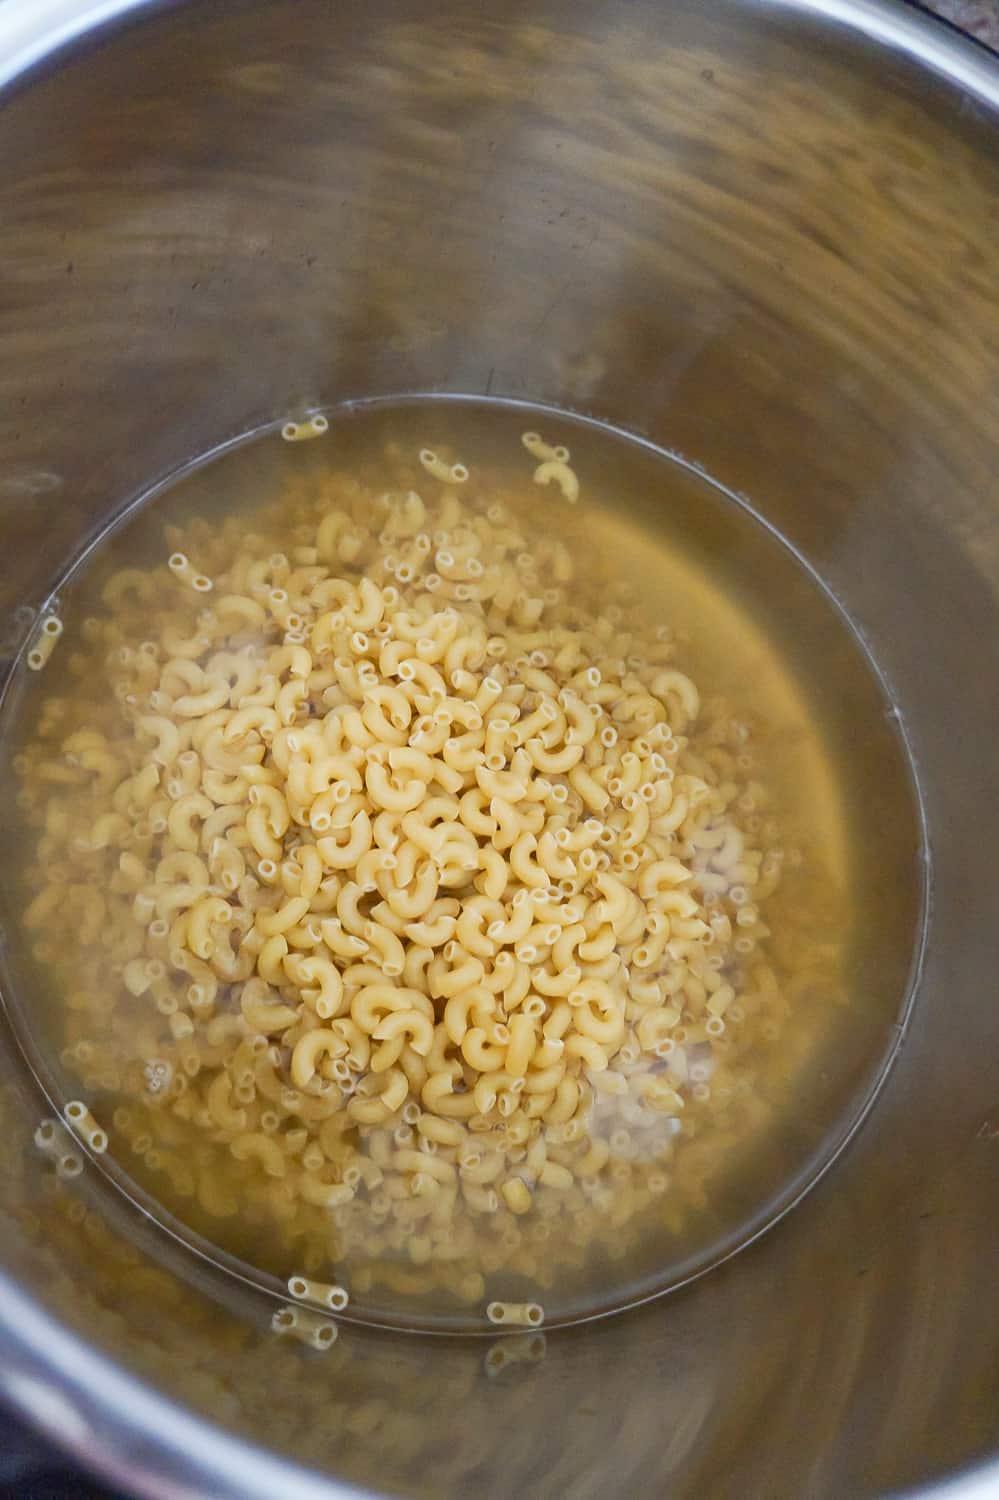 uncooked macaroni noodles in liquid in an Instant Pot